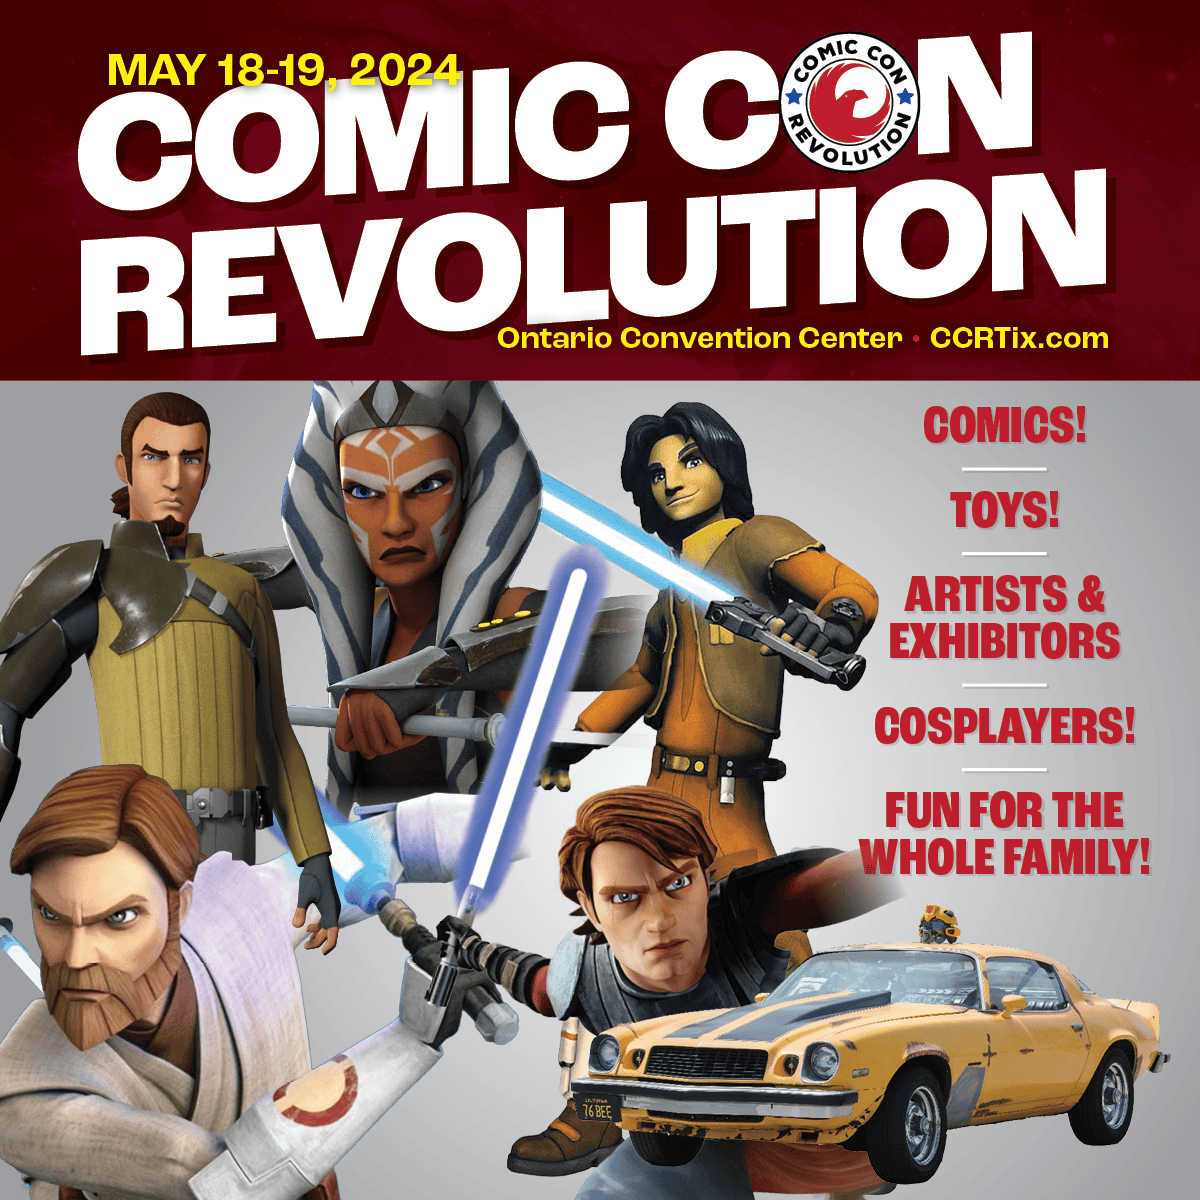 Comic Con Revolution 2024 is Back in Ontario: Geeks and Nerds Unite!